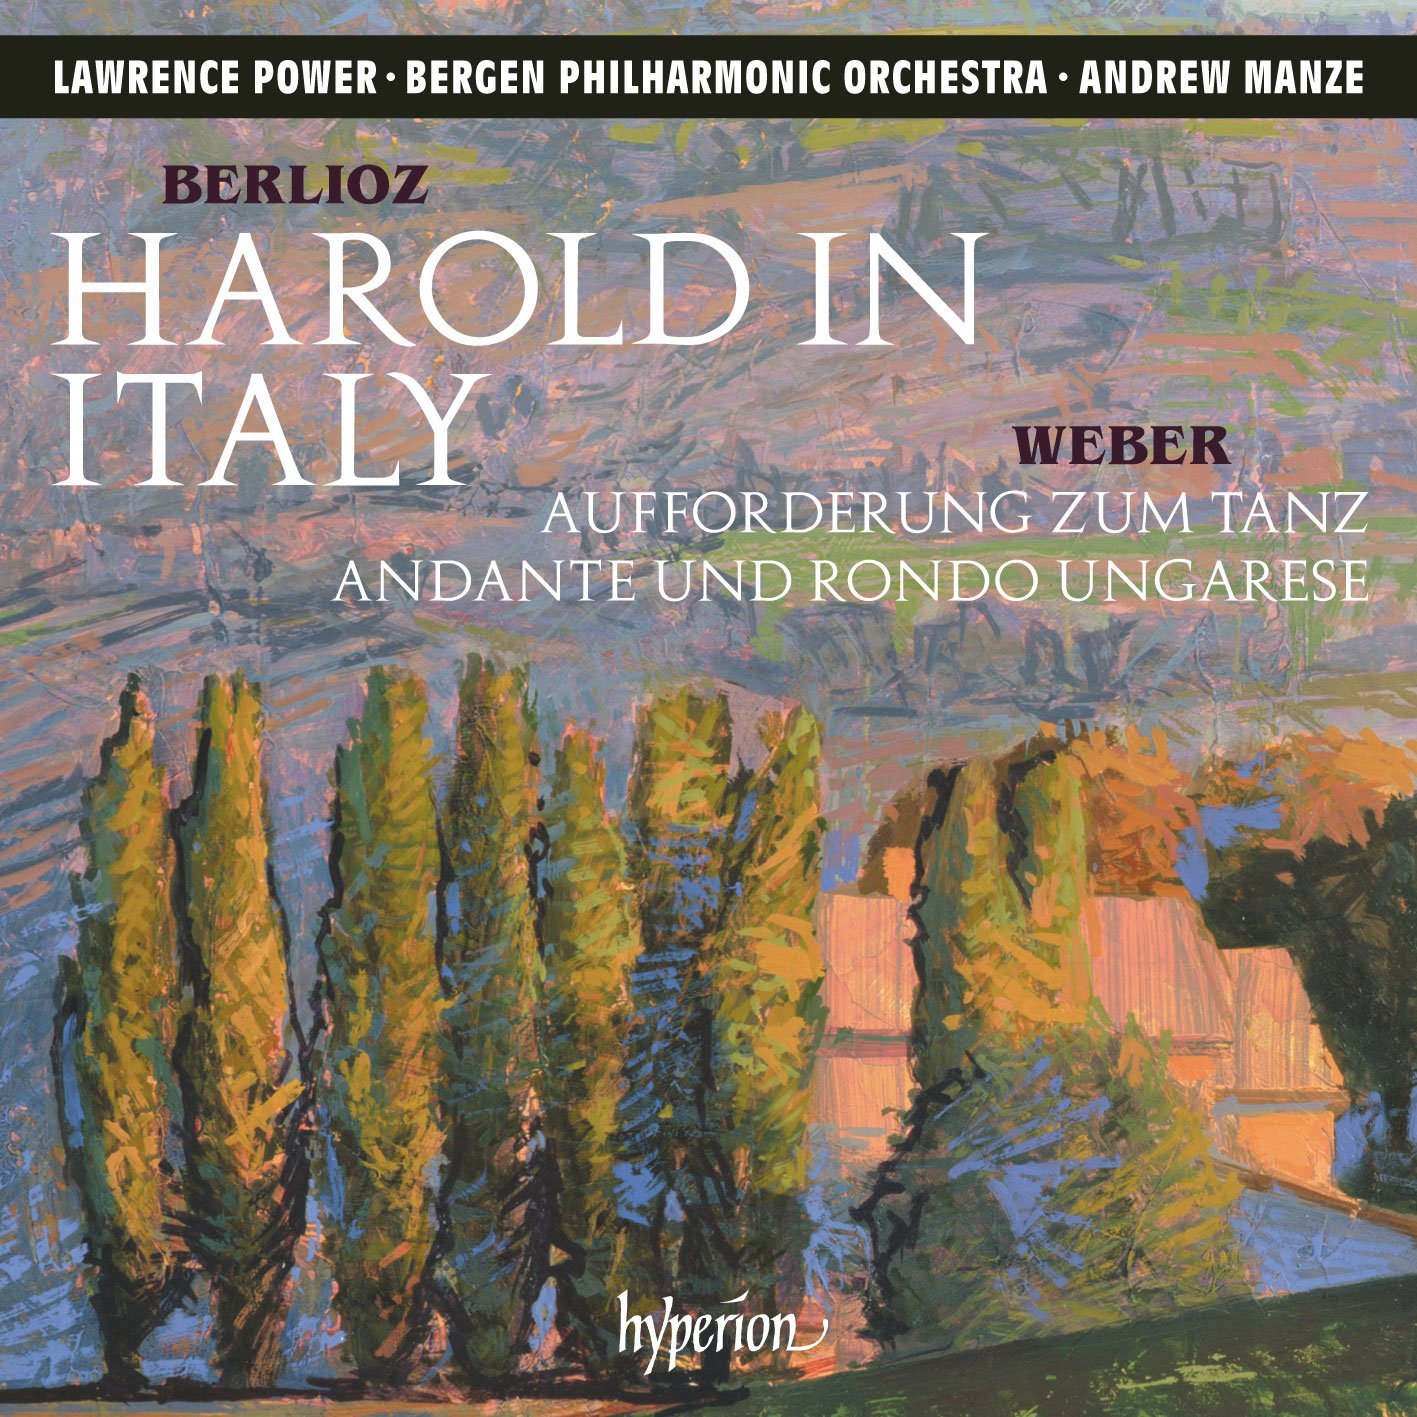 harold in italy hyperion manze